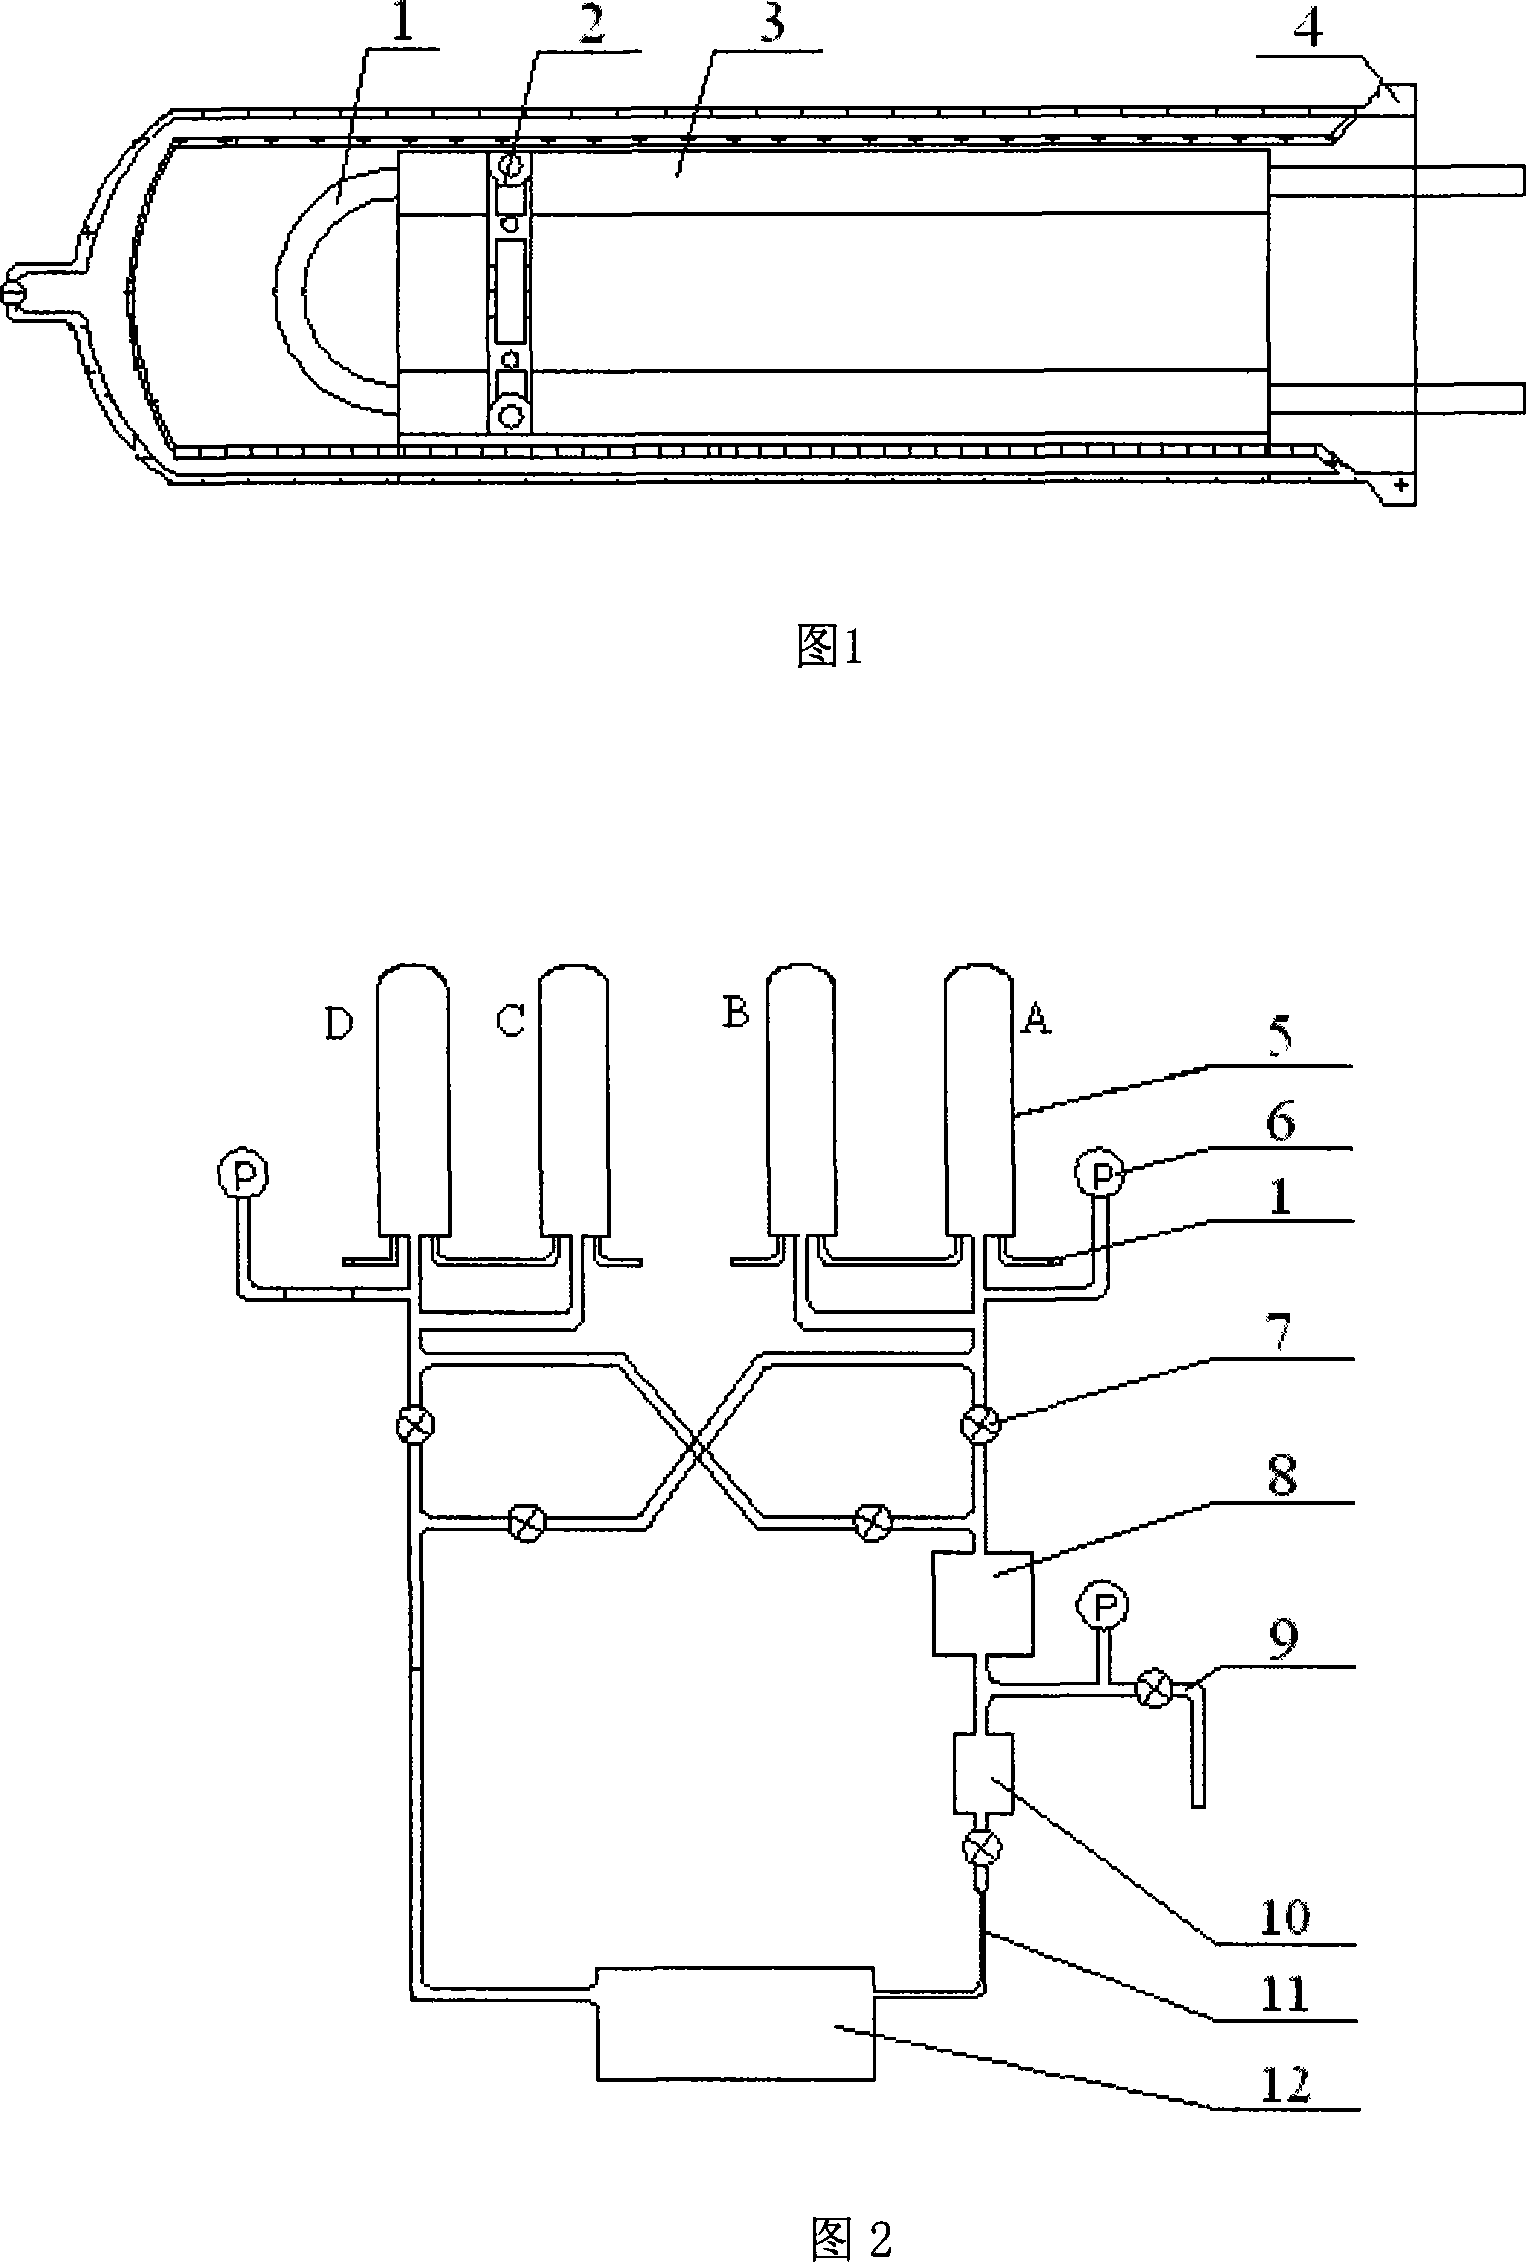 Daytime continuous solar absorption refrigeration system